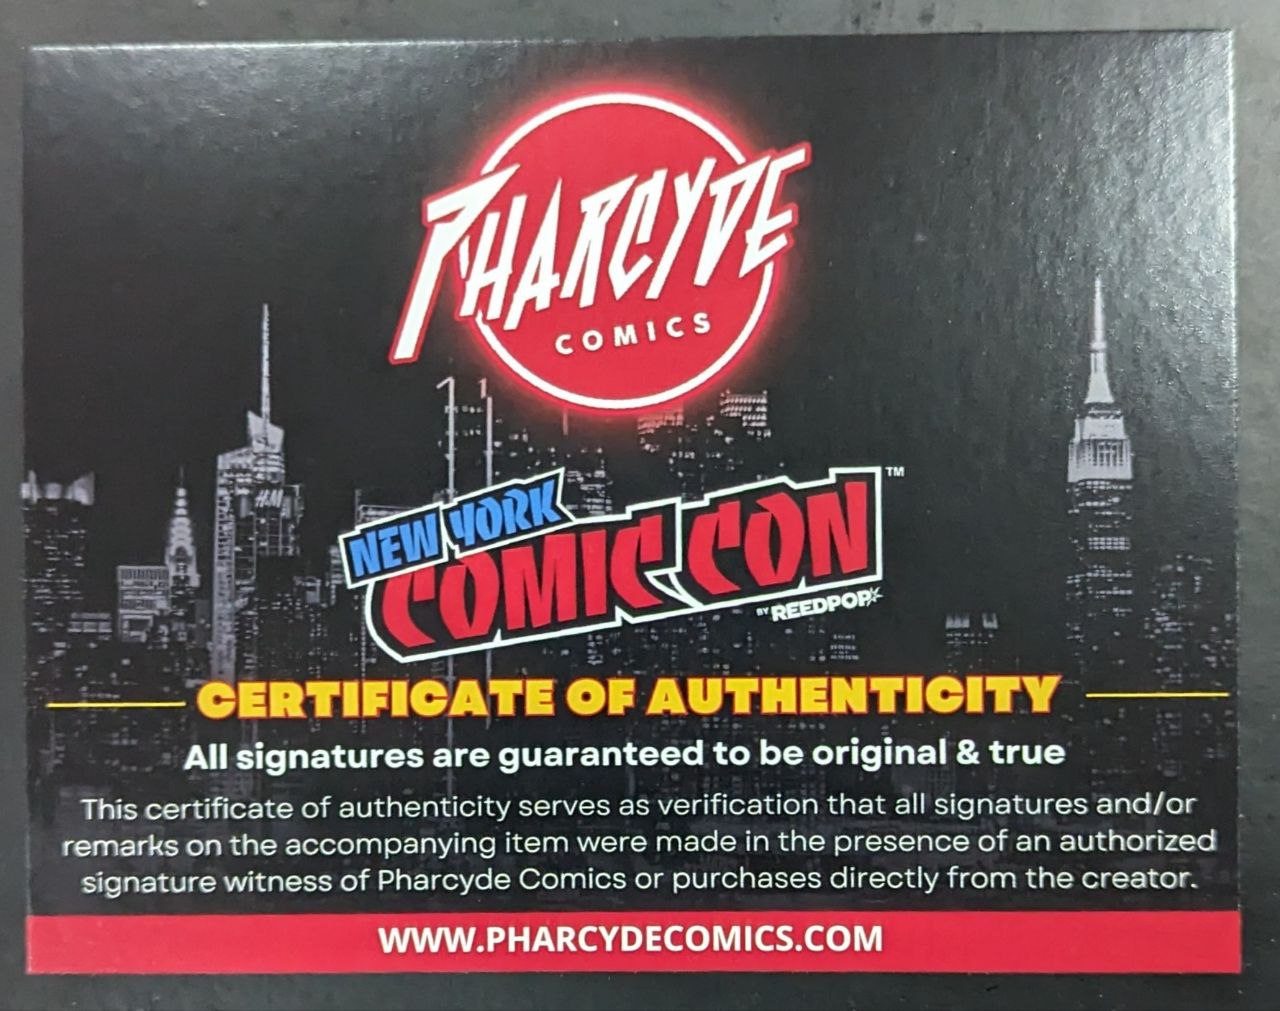 KIM THE DELUSIONAL - NYCC FOIL SET (LTD 10) - SIGNED BY BILL MCKAY W/COA - FREE TOPLOADERS